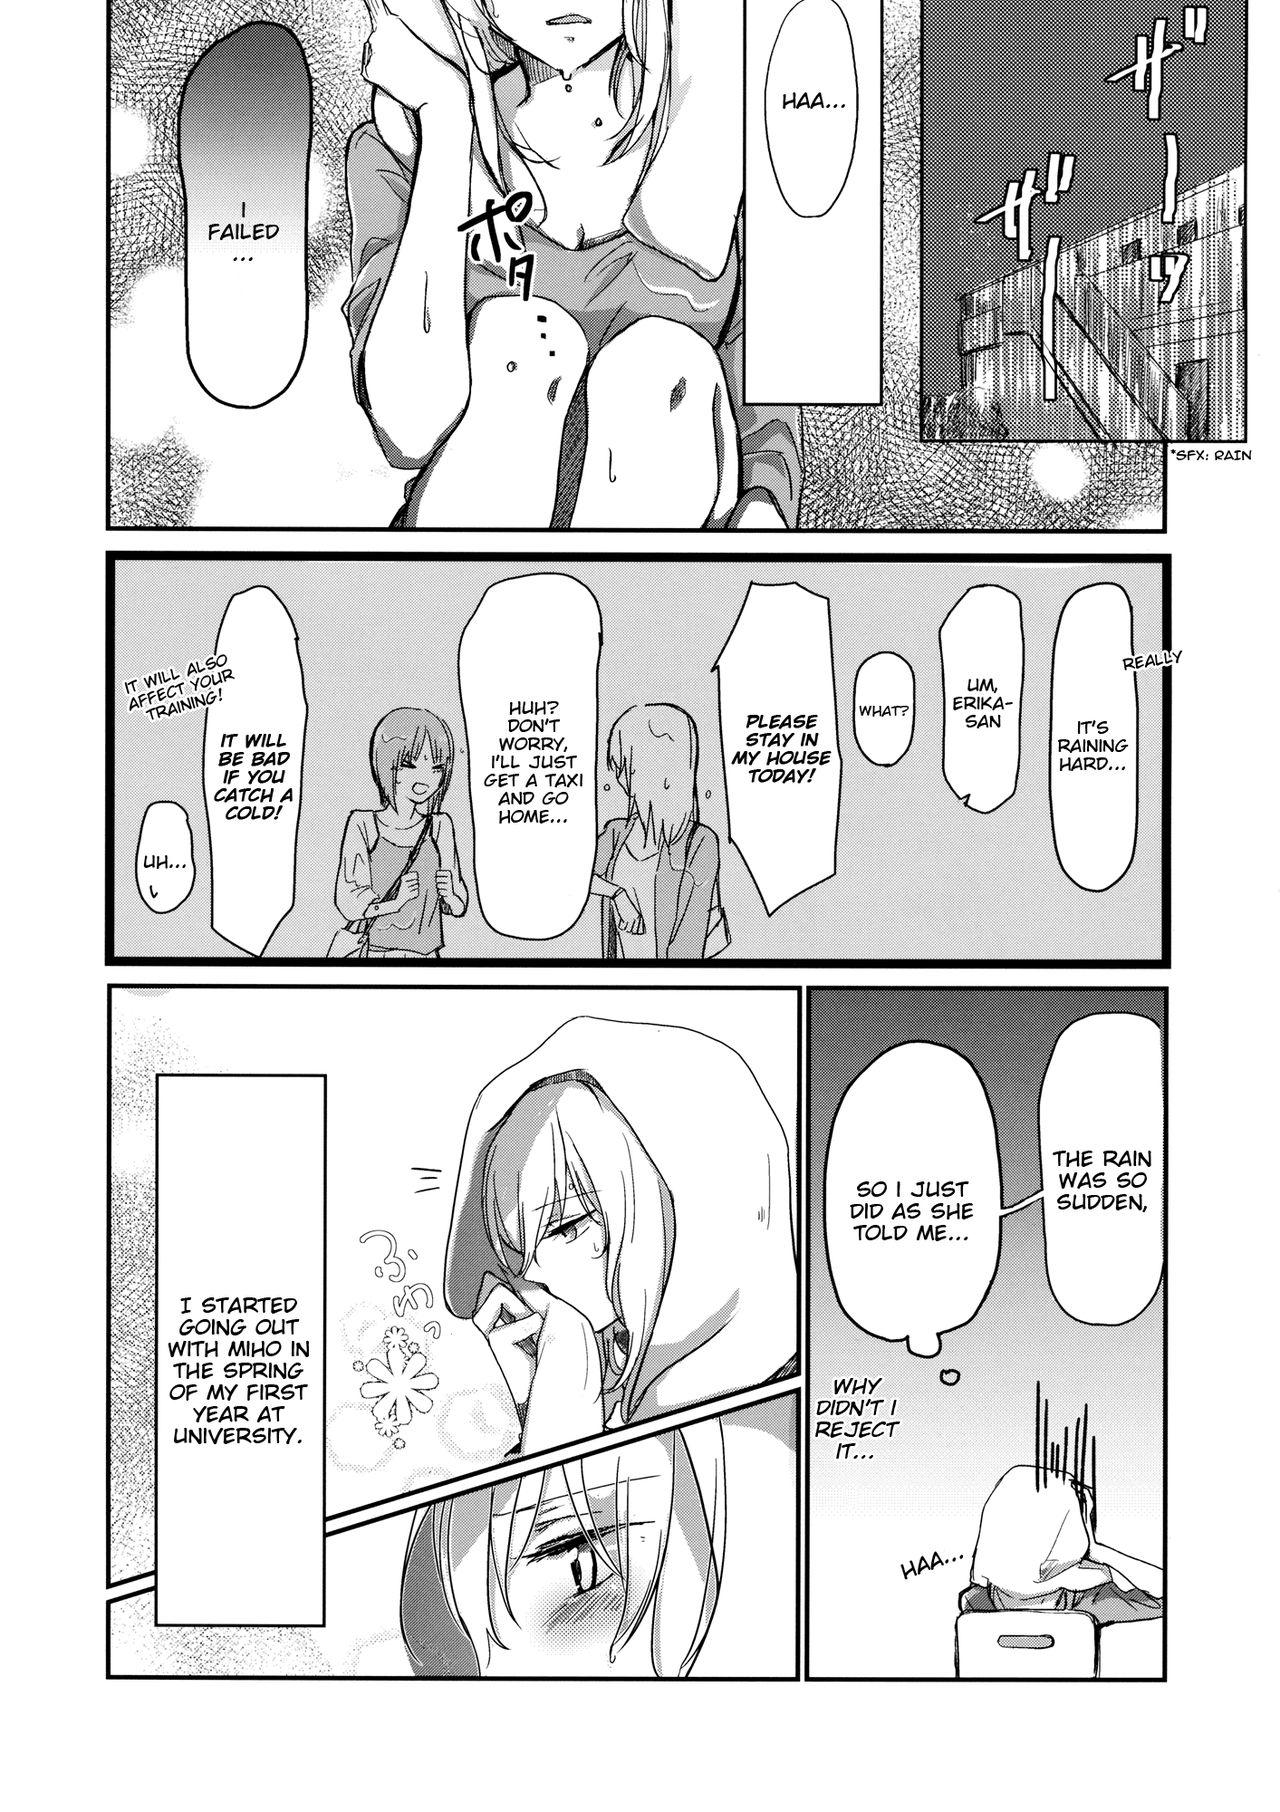 Pendeja for the first time - Girls und panzer Soloboy - Page 3